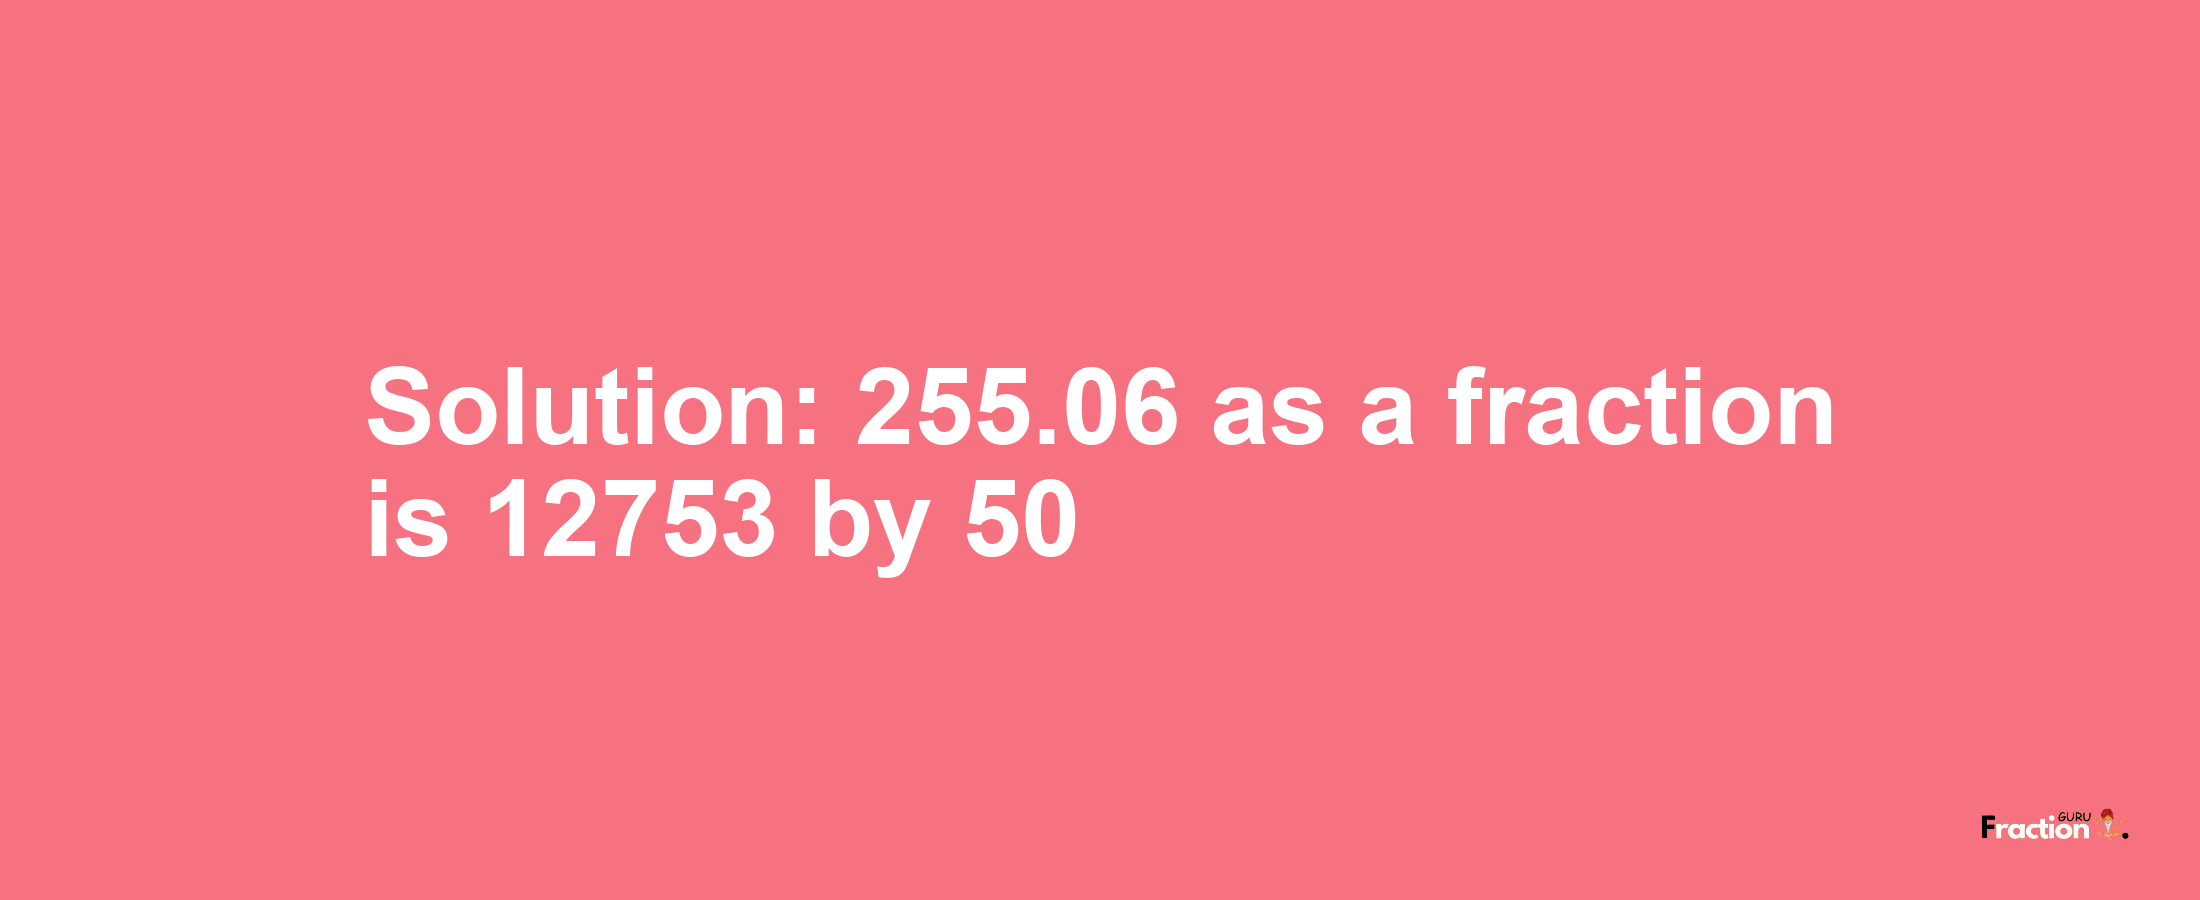 Solution:255.06 as a fraction is 12753/50